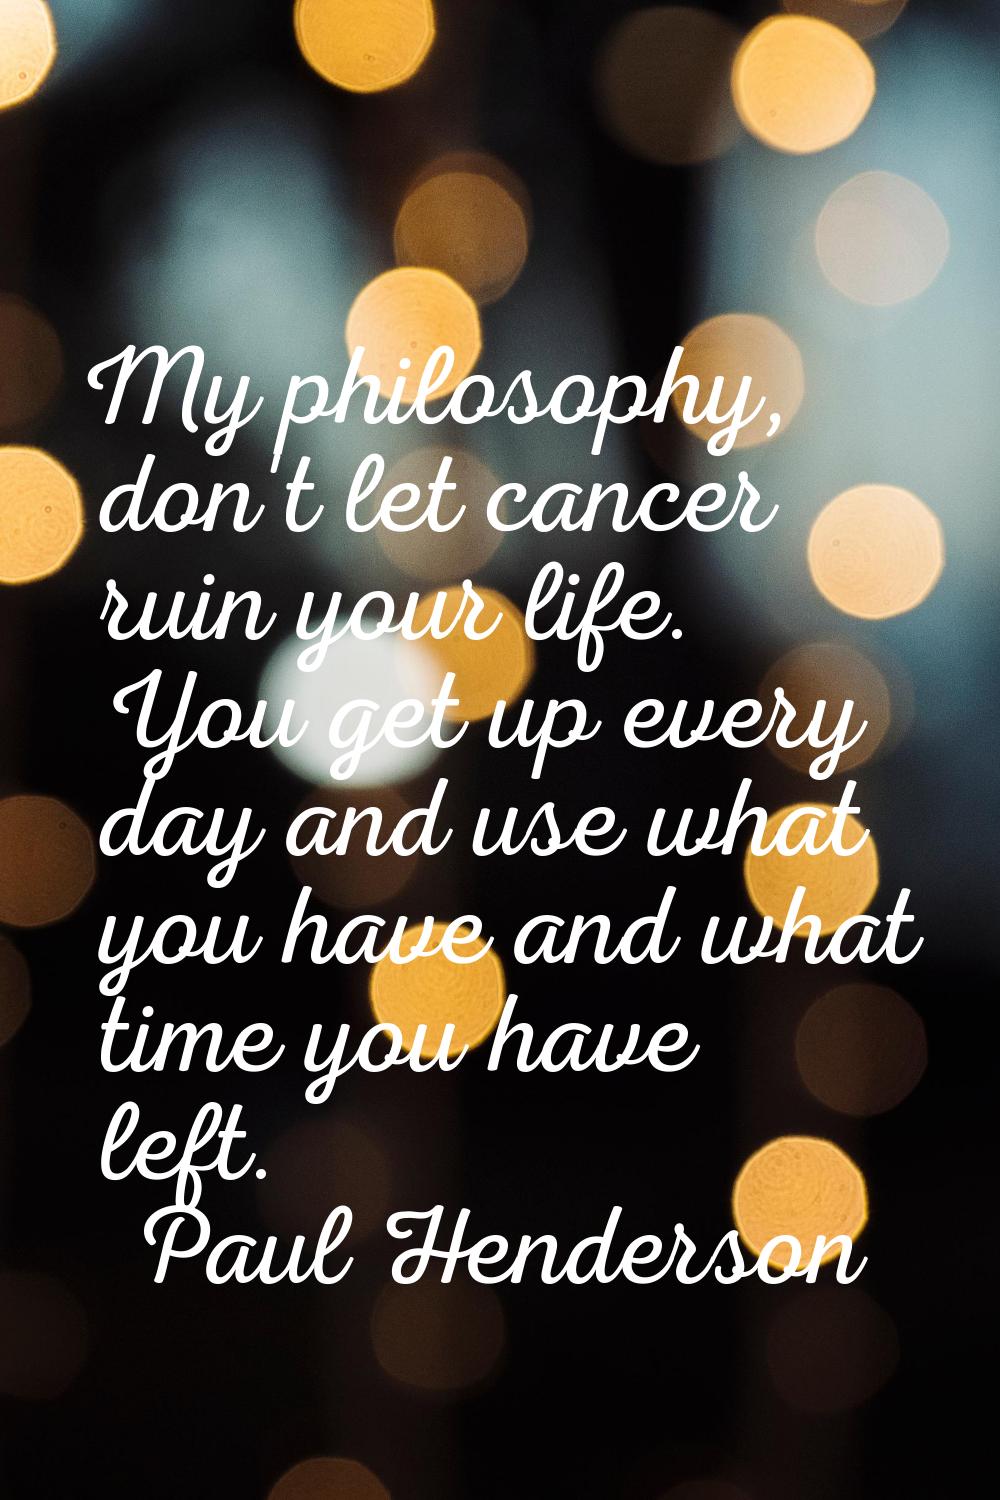 My philosophy, don't let cancer ruin your life. You get up every day and use what you have and what